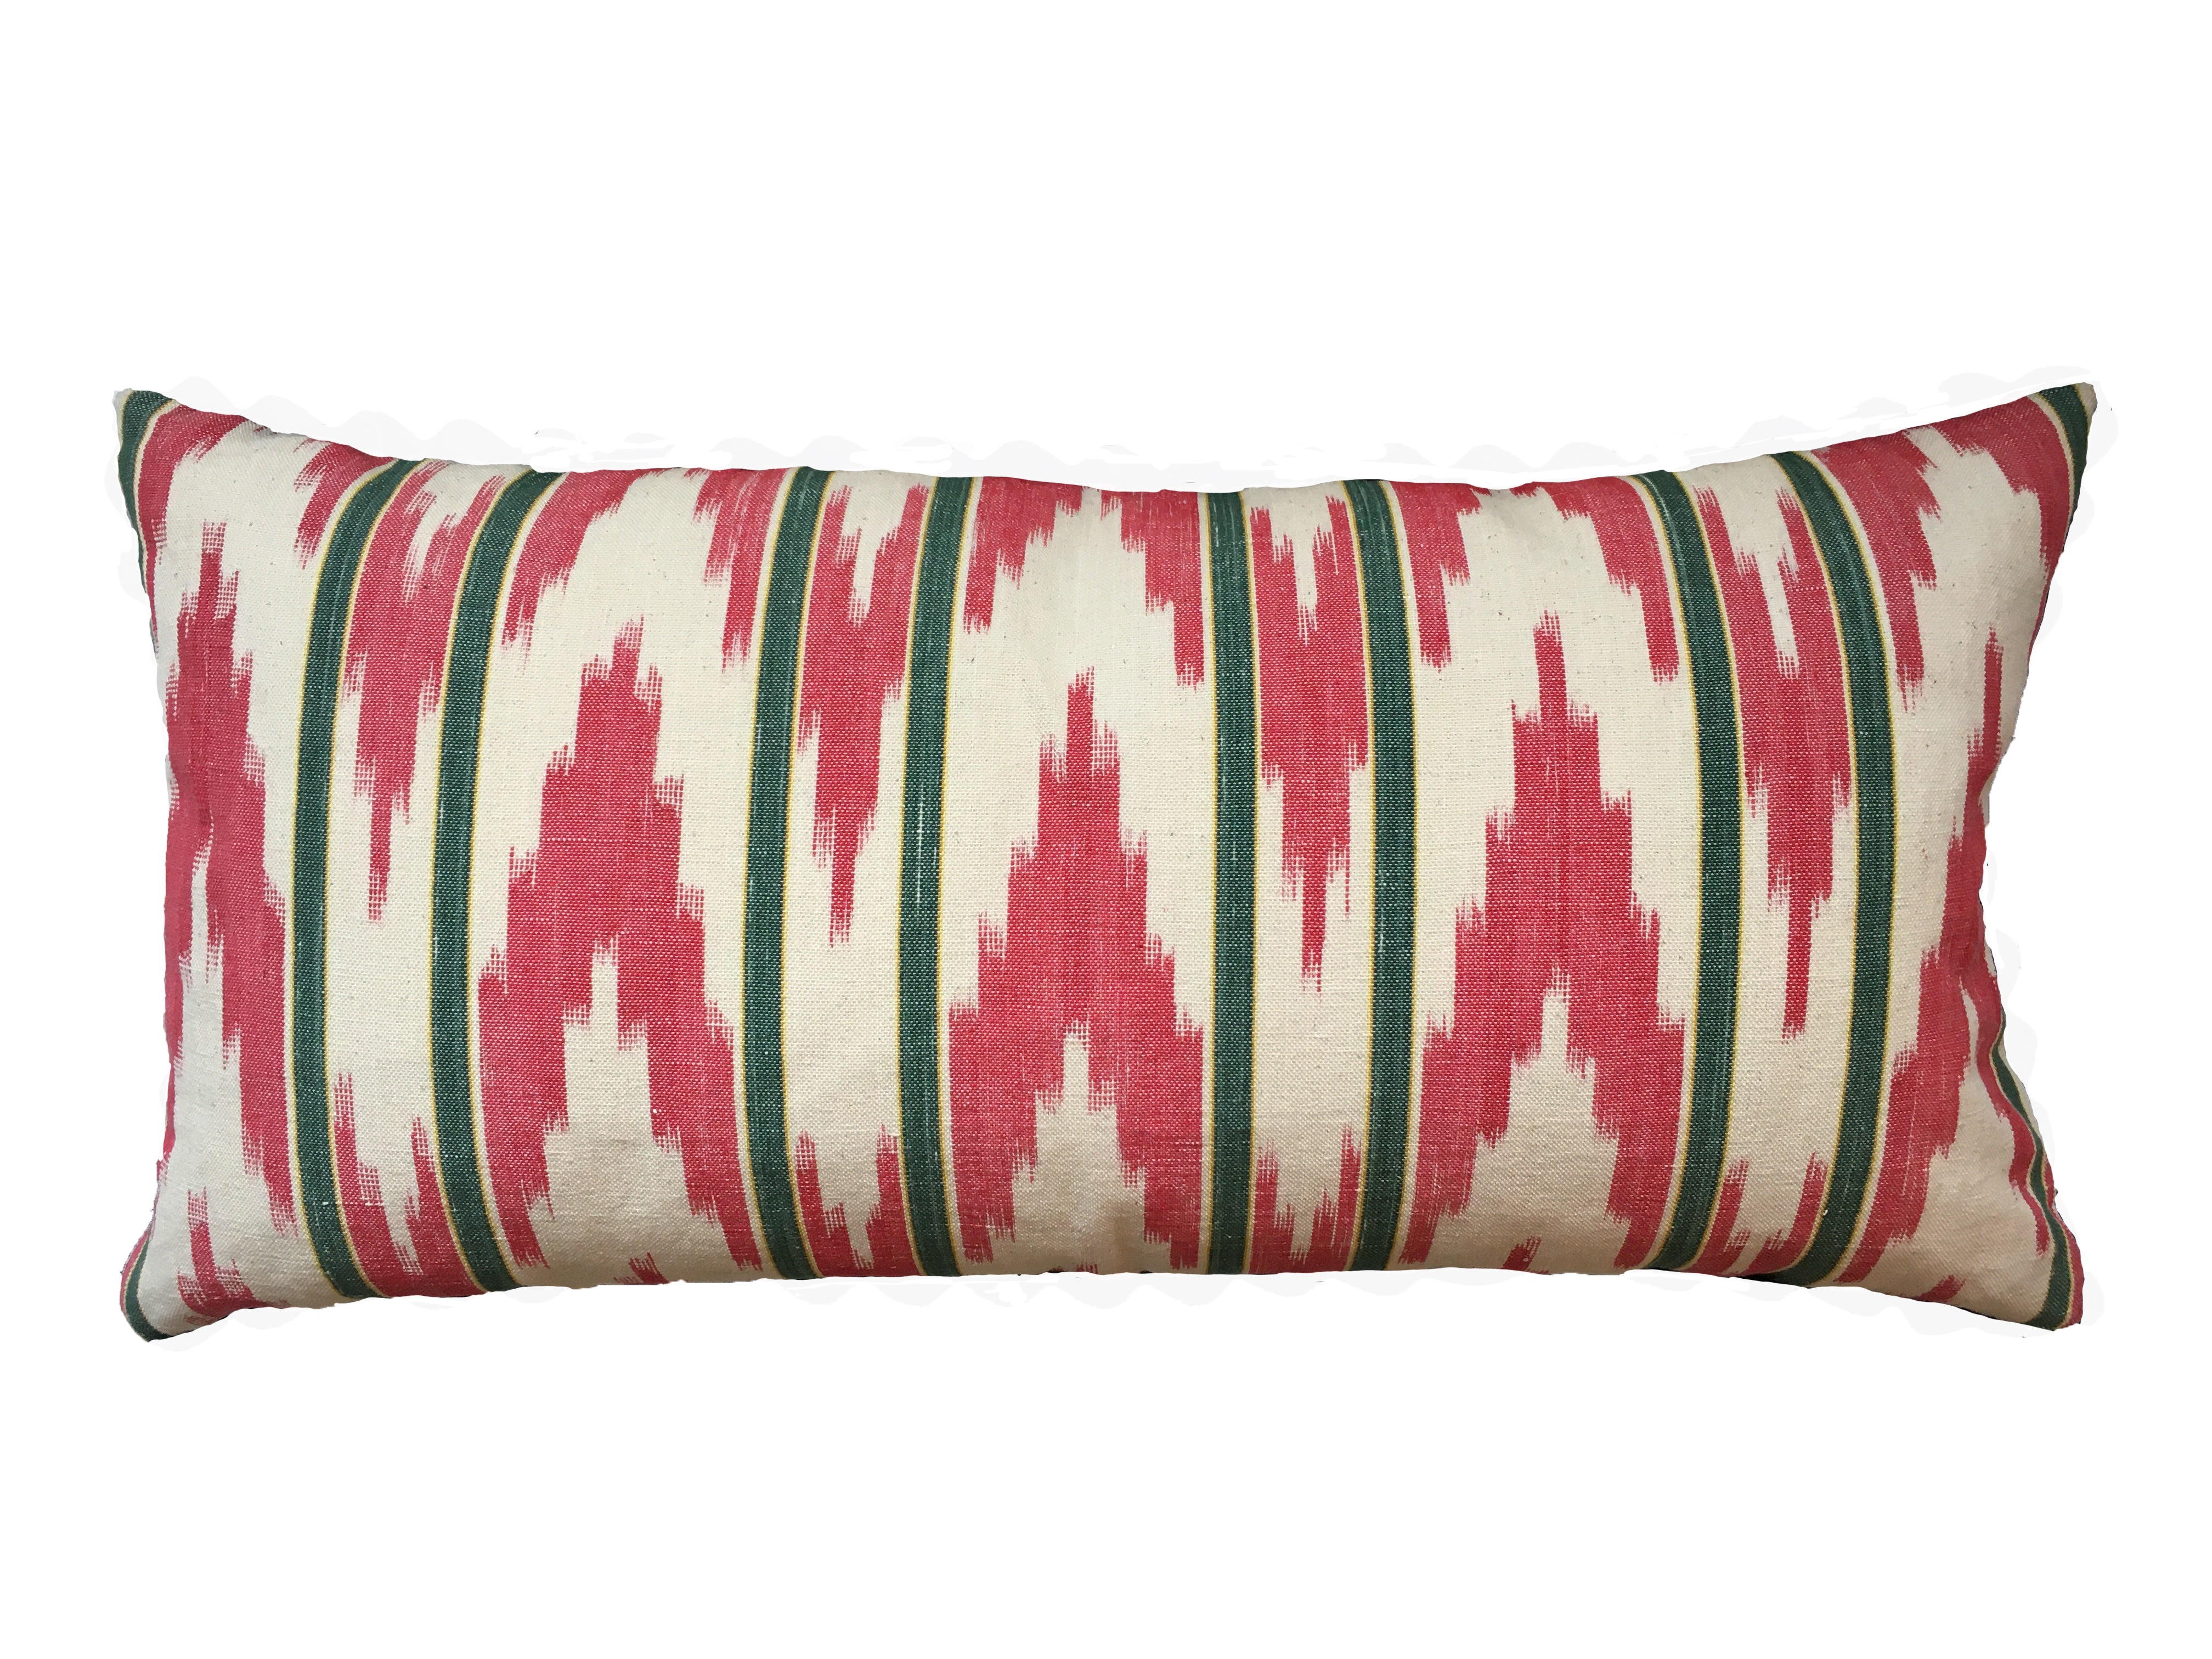 MALLORCAN FABRIC CUSHION - GREEN STRIPE WITH RED ZIGZAG FABRIC